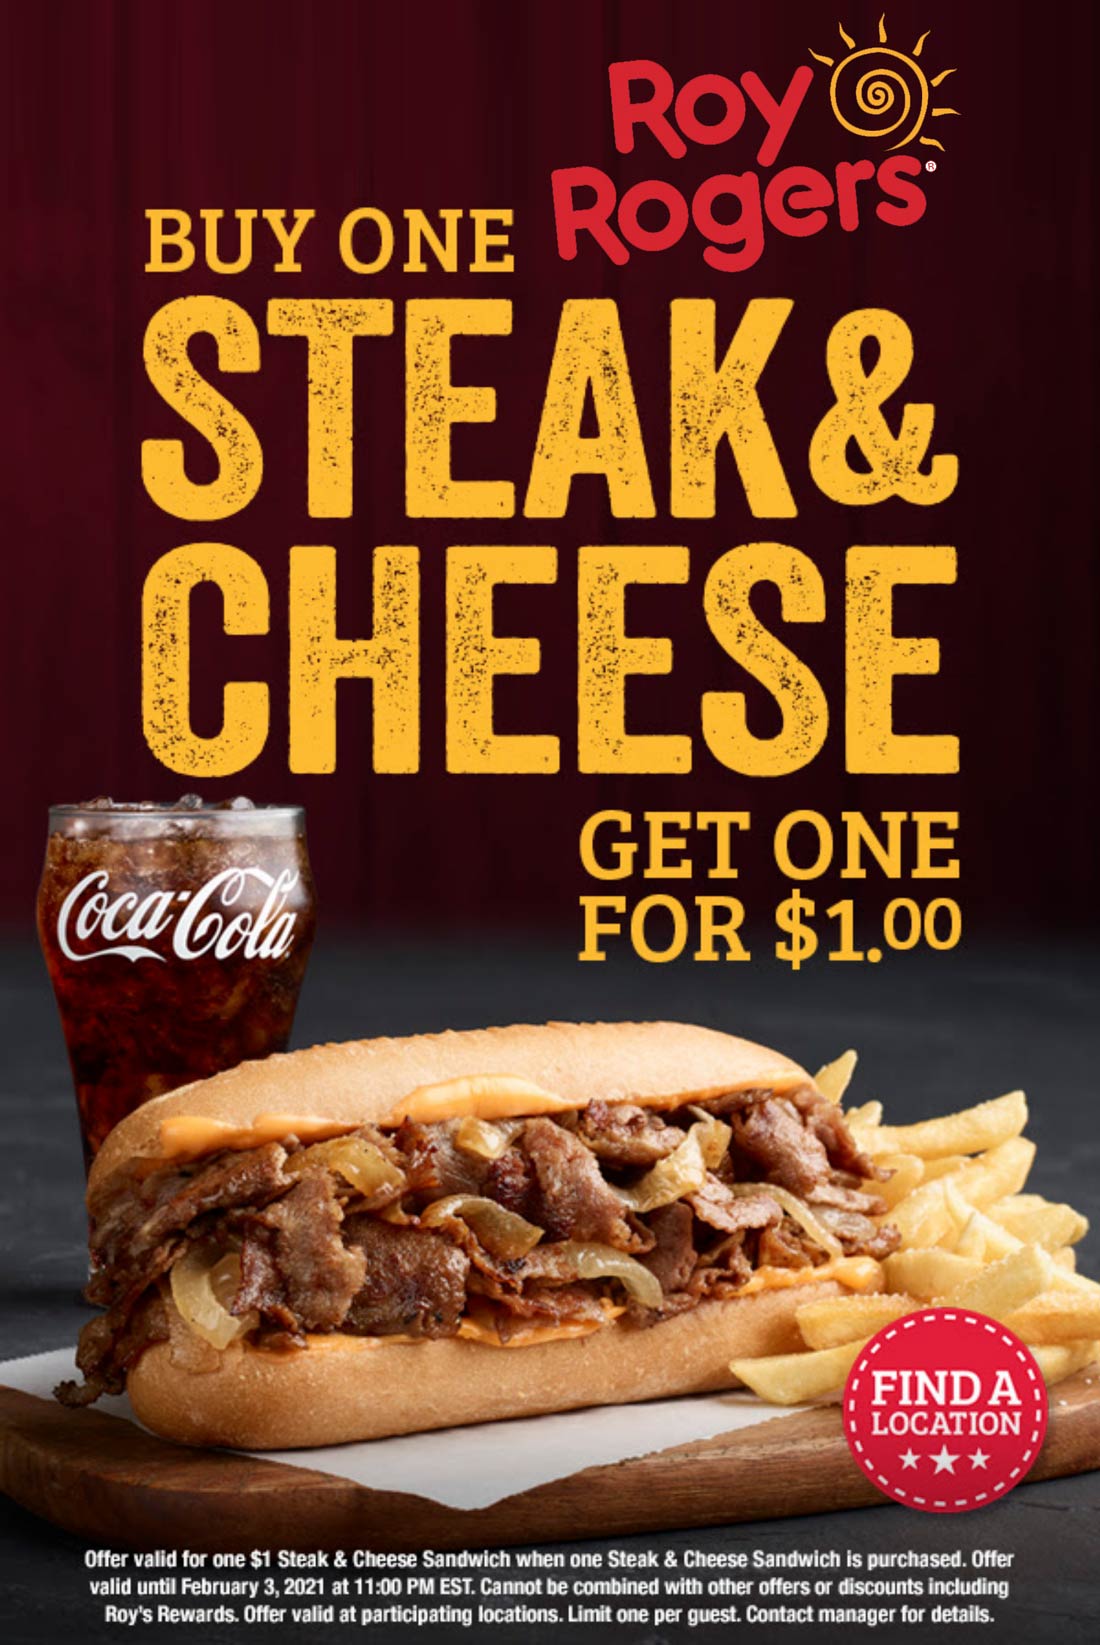 Roy Rogers restaurants Coupon  Second steak & cheese sandwich for $1 today at Roy Rogers #royrogers 